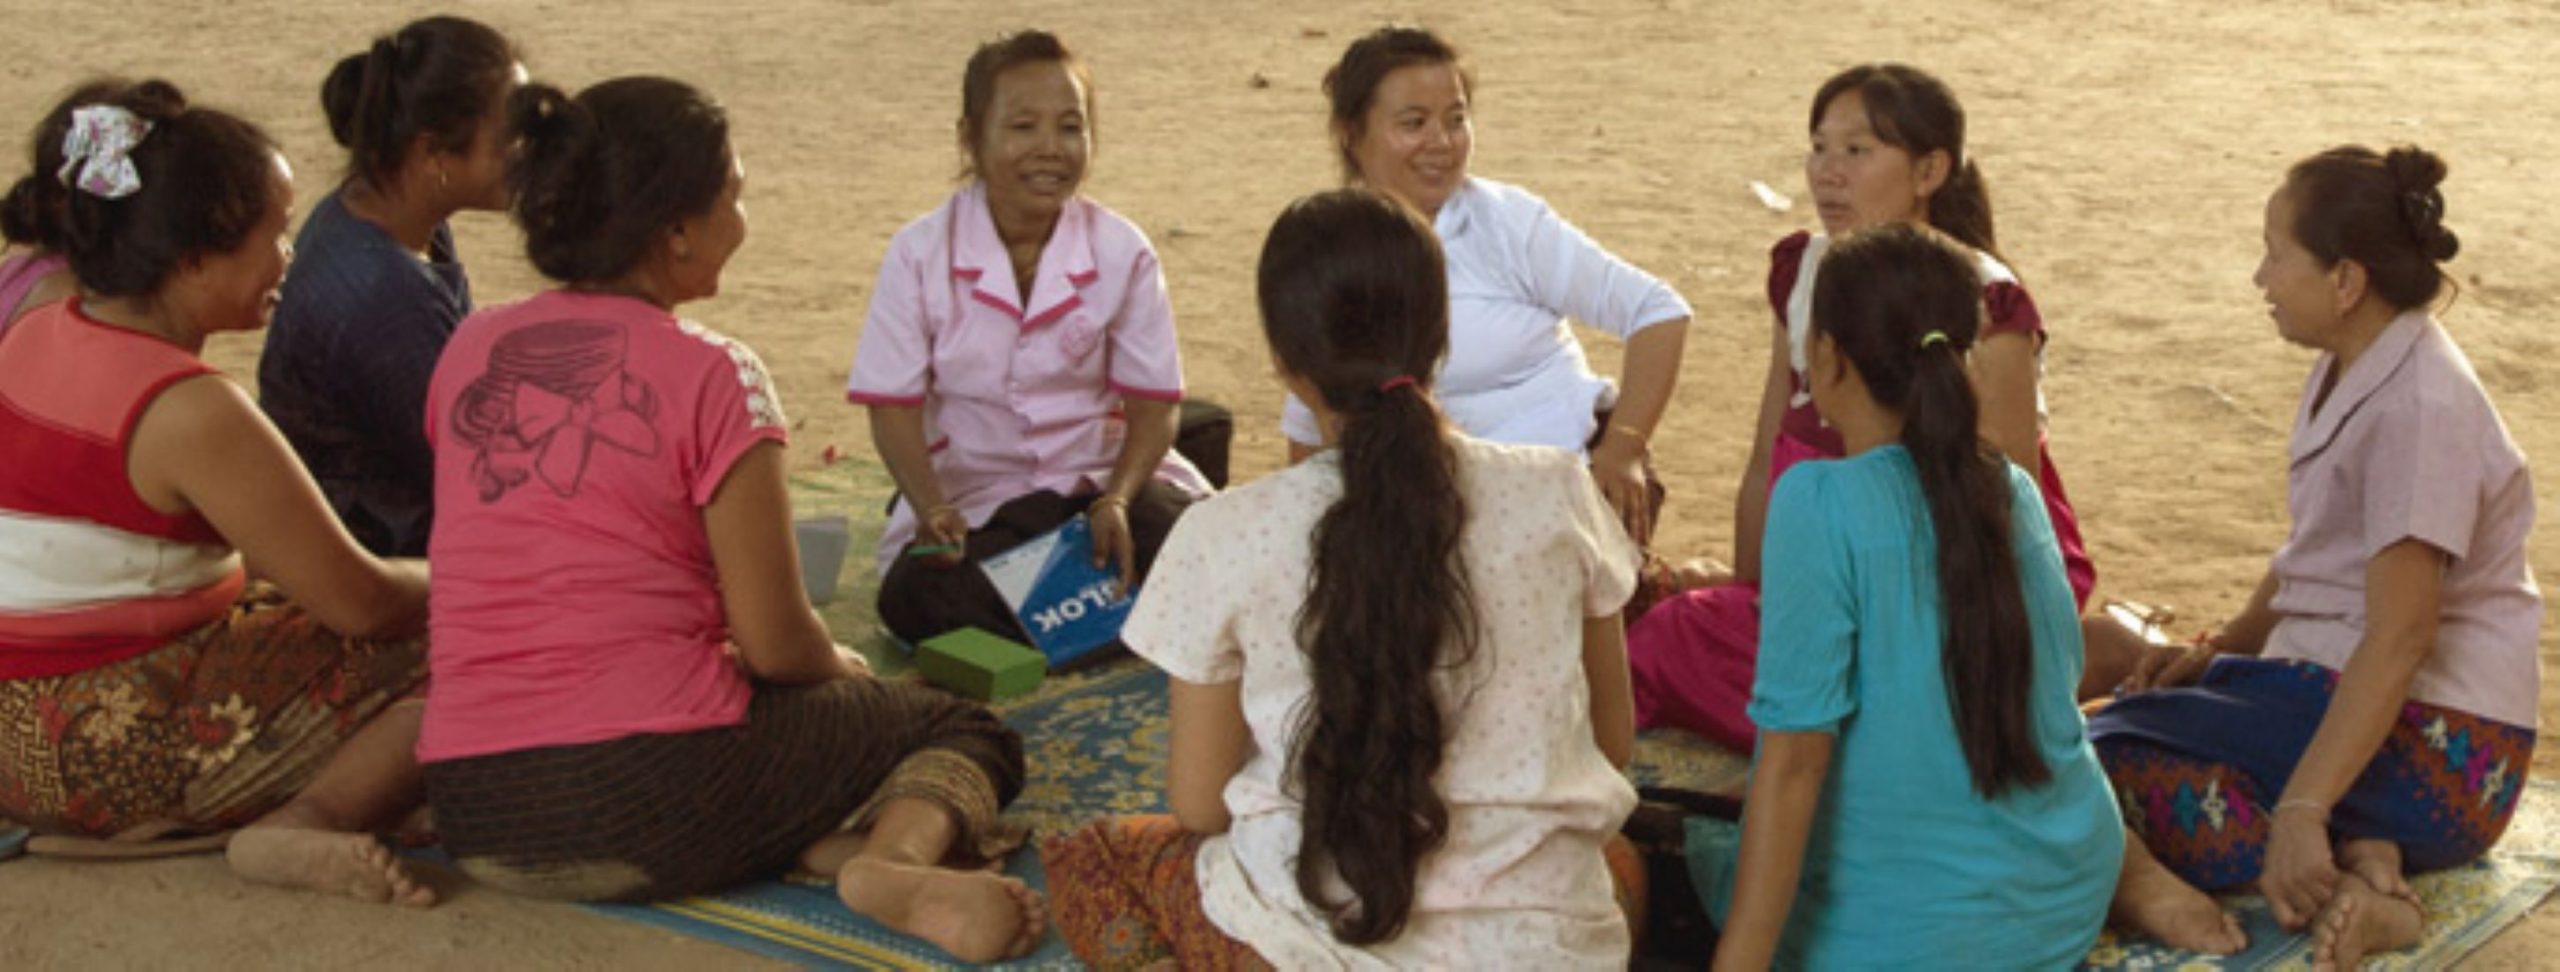 Laos To Improve Well-Being Of Children, Mothers In Rural Areas